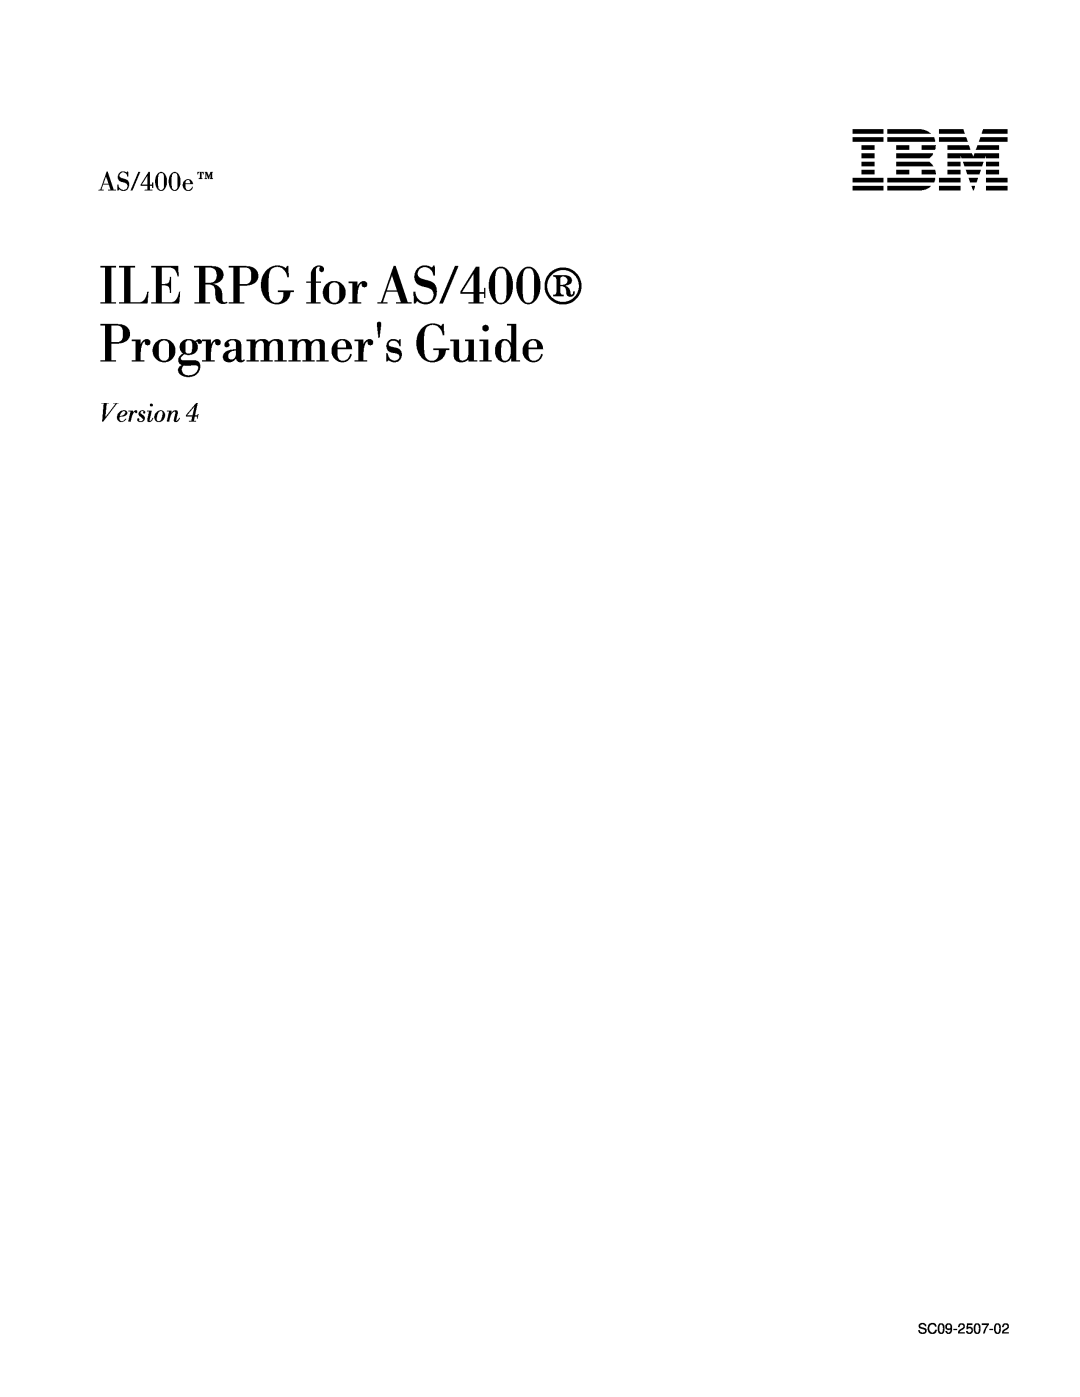 IBM manual ILE RPG for AS/400 Programmers Guide, AS/400e, Version 